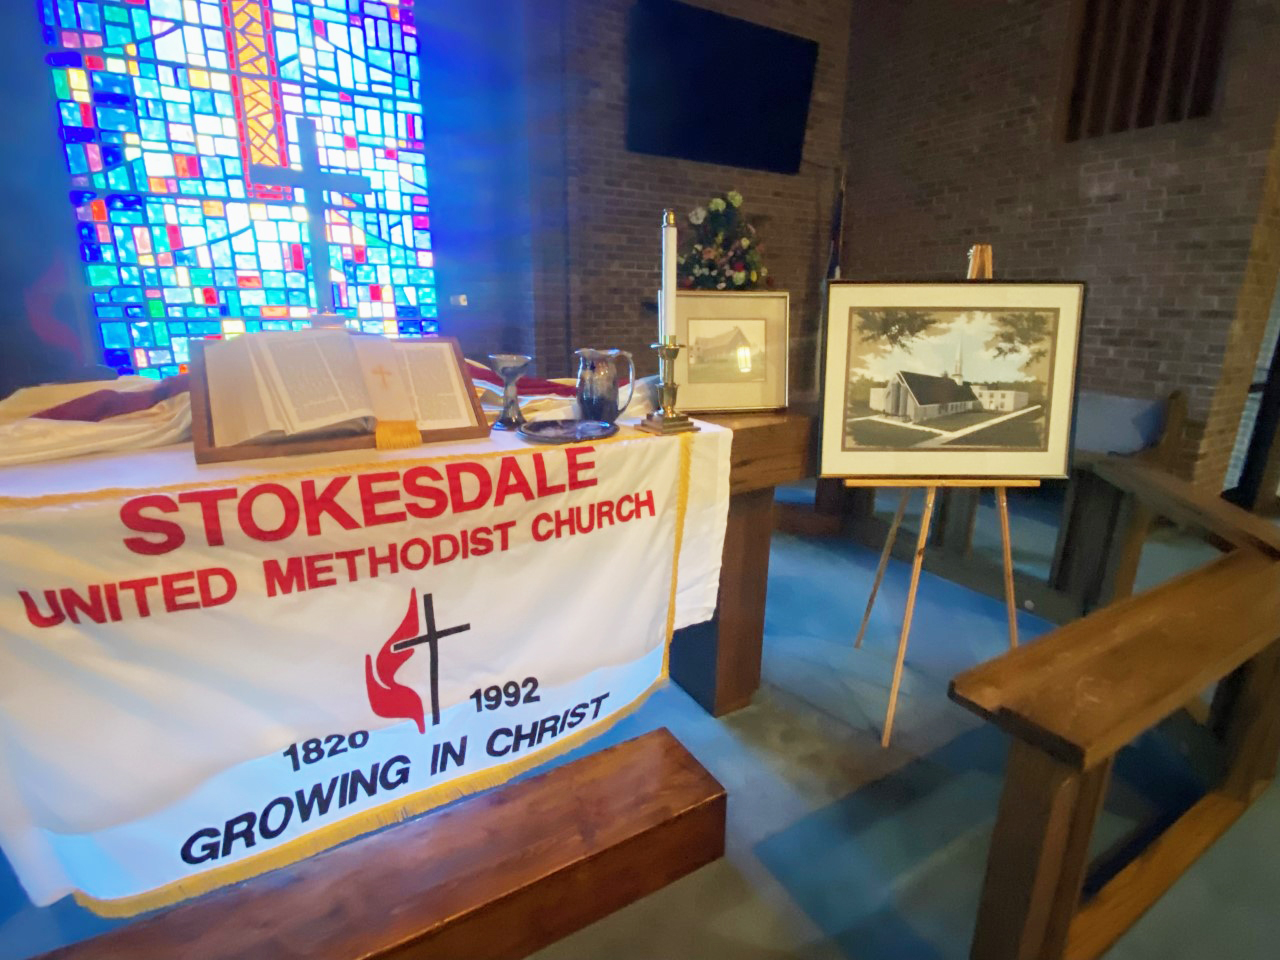 Stokesdale Church recently voted to become a lighthouse church. Courtesy of Ed and Sarah McKinney